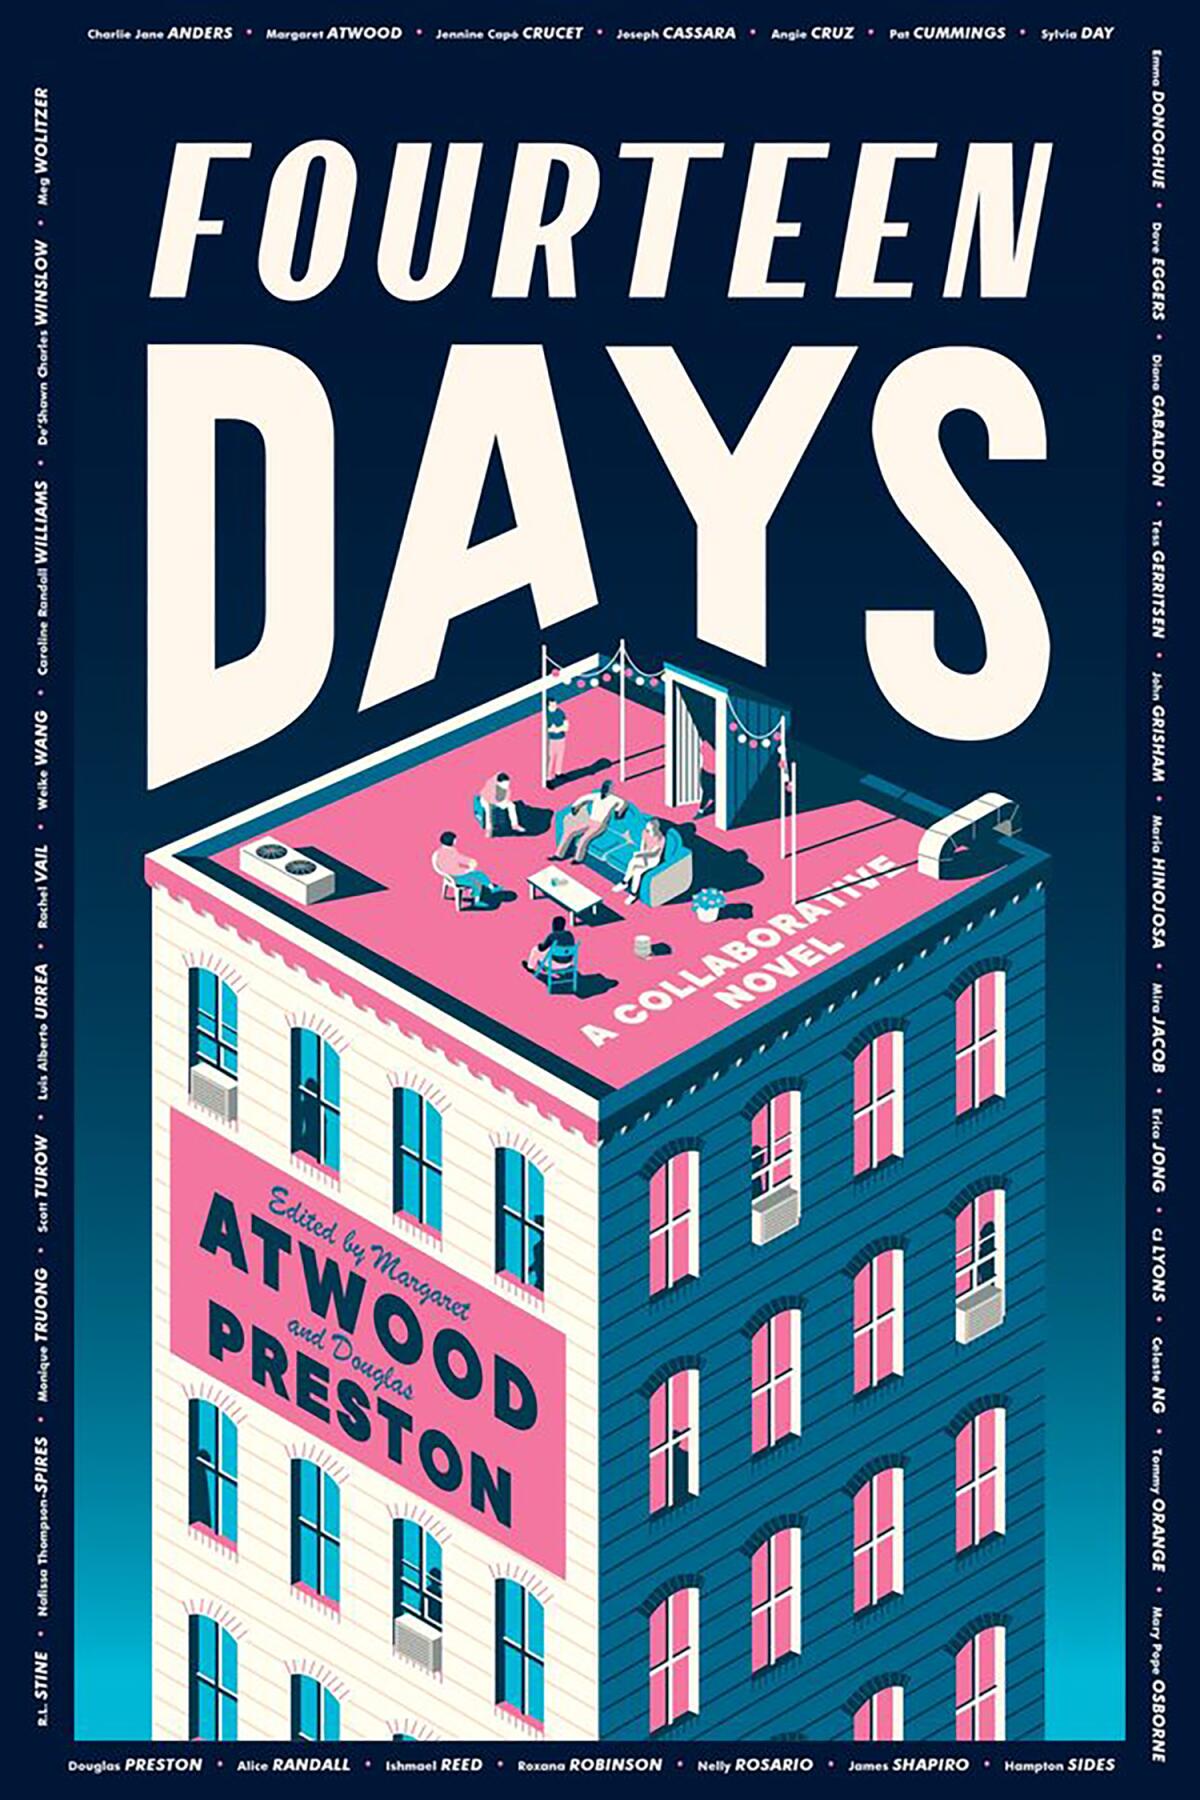 'Fourteen Days: A Collaborative Novel' edited by Margaret Atwood and Douglas Preston.